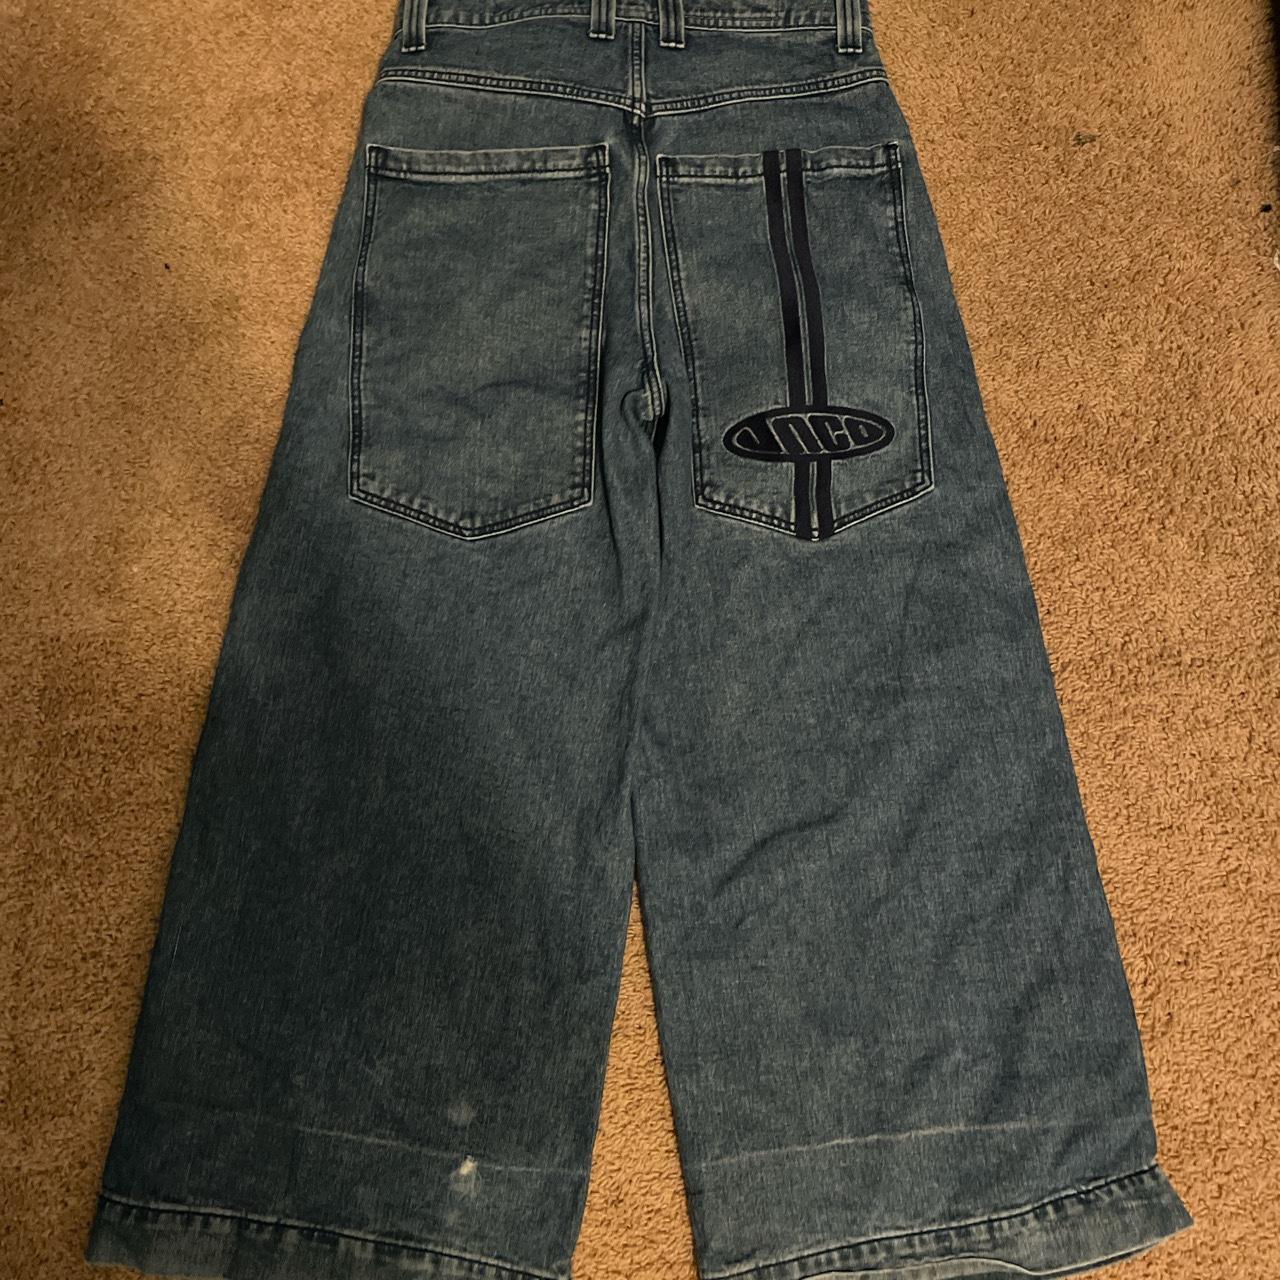 JNCO WIDELOAD BAGGY 220 message before buying... - Depop